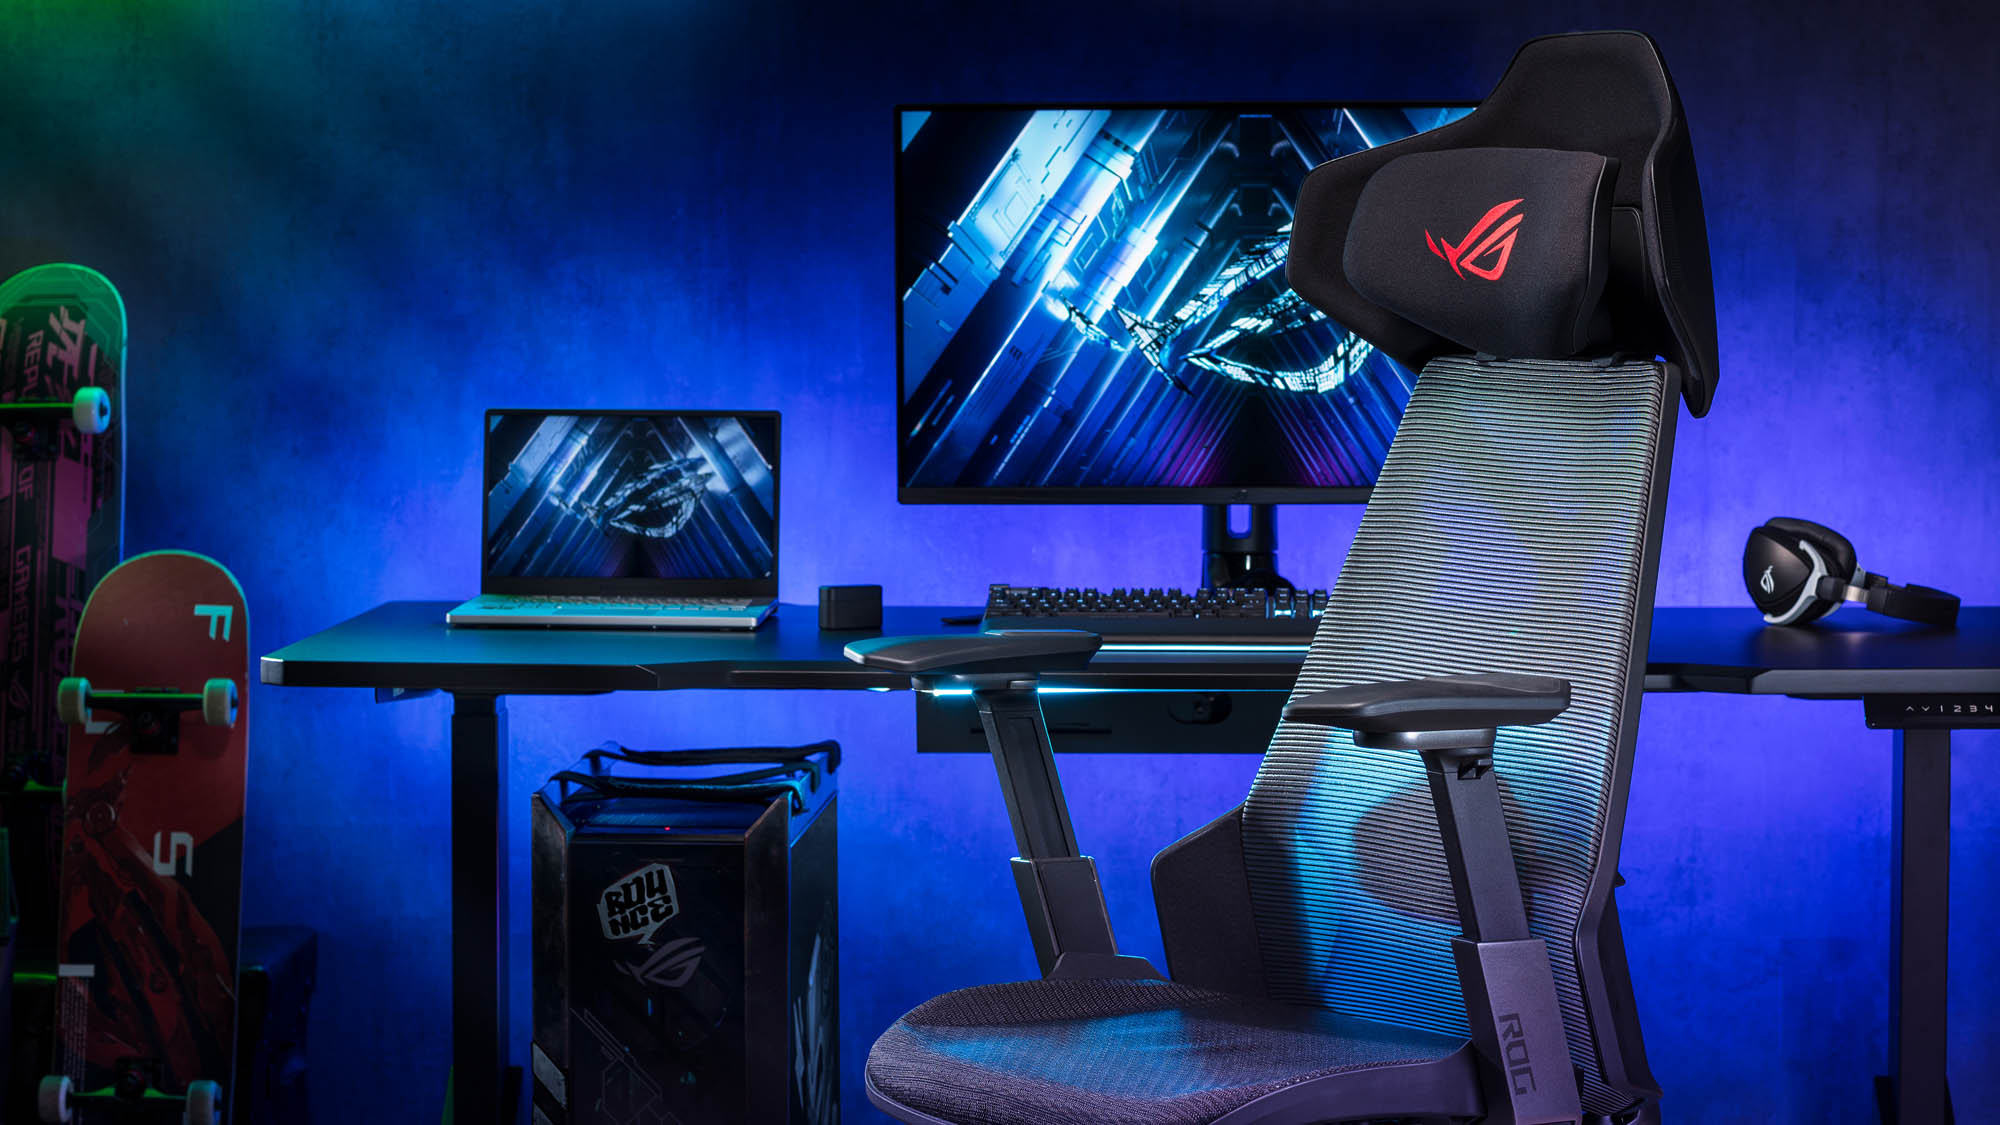 All of the groundbreaking gaming gear that ROG announced at CES 2023